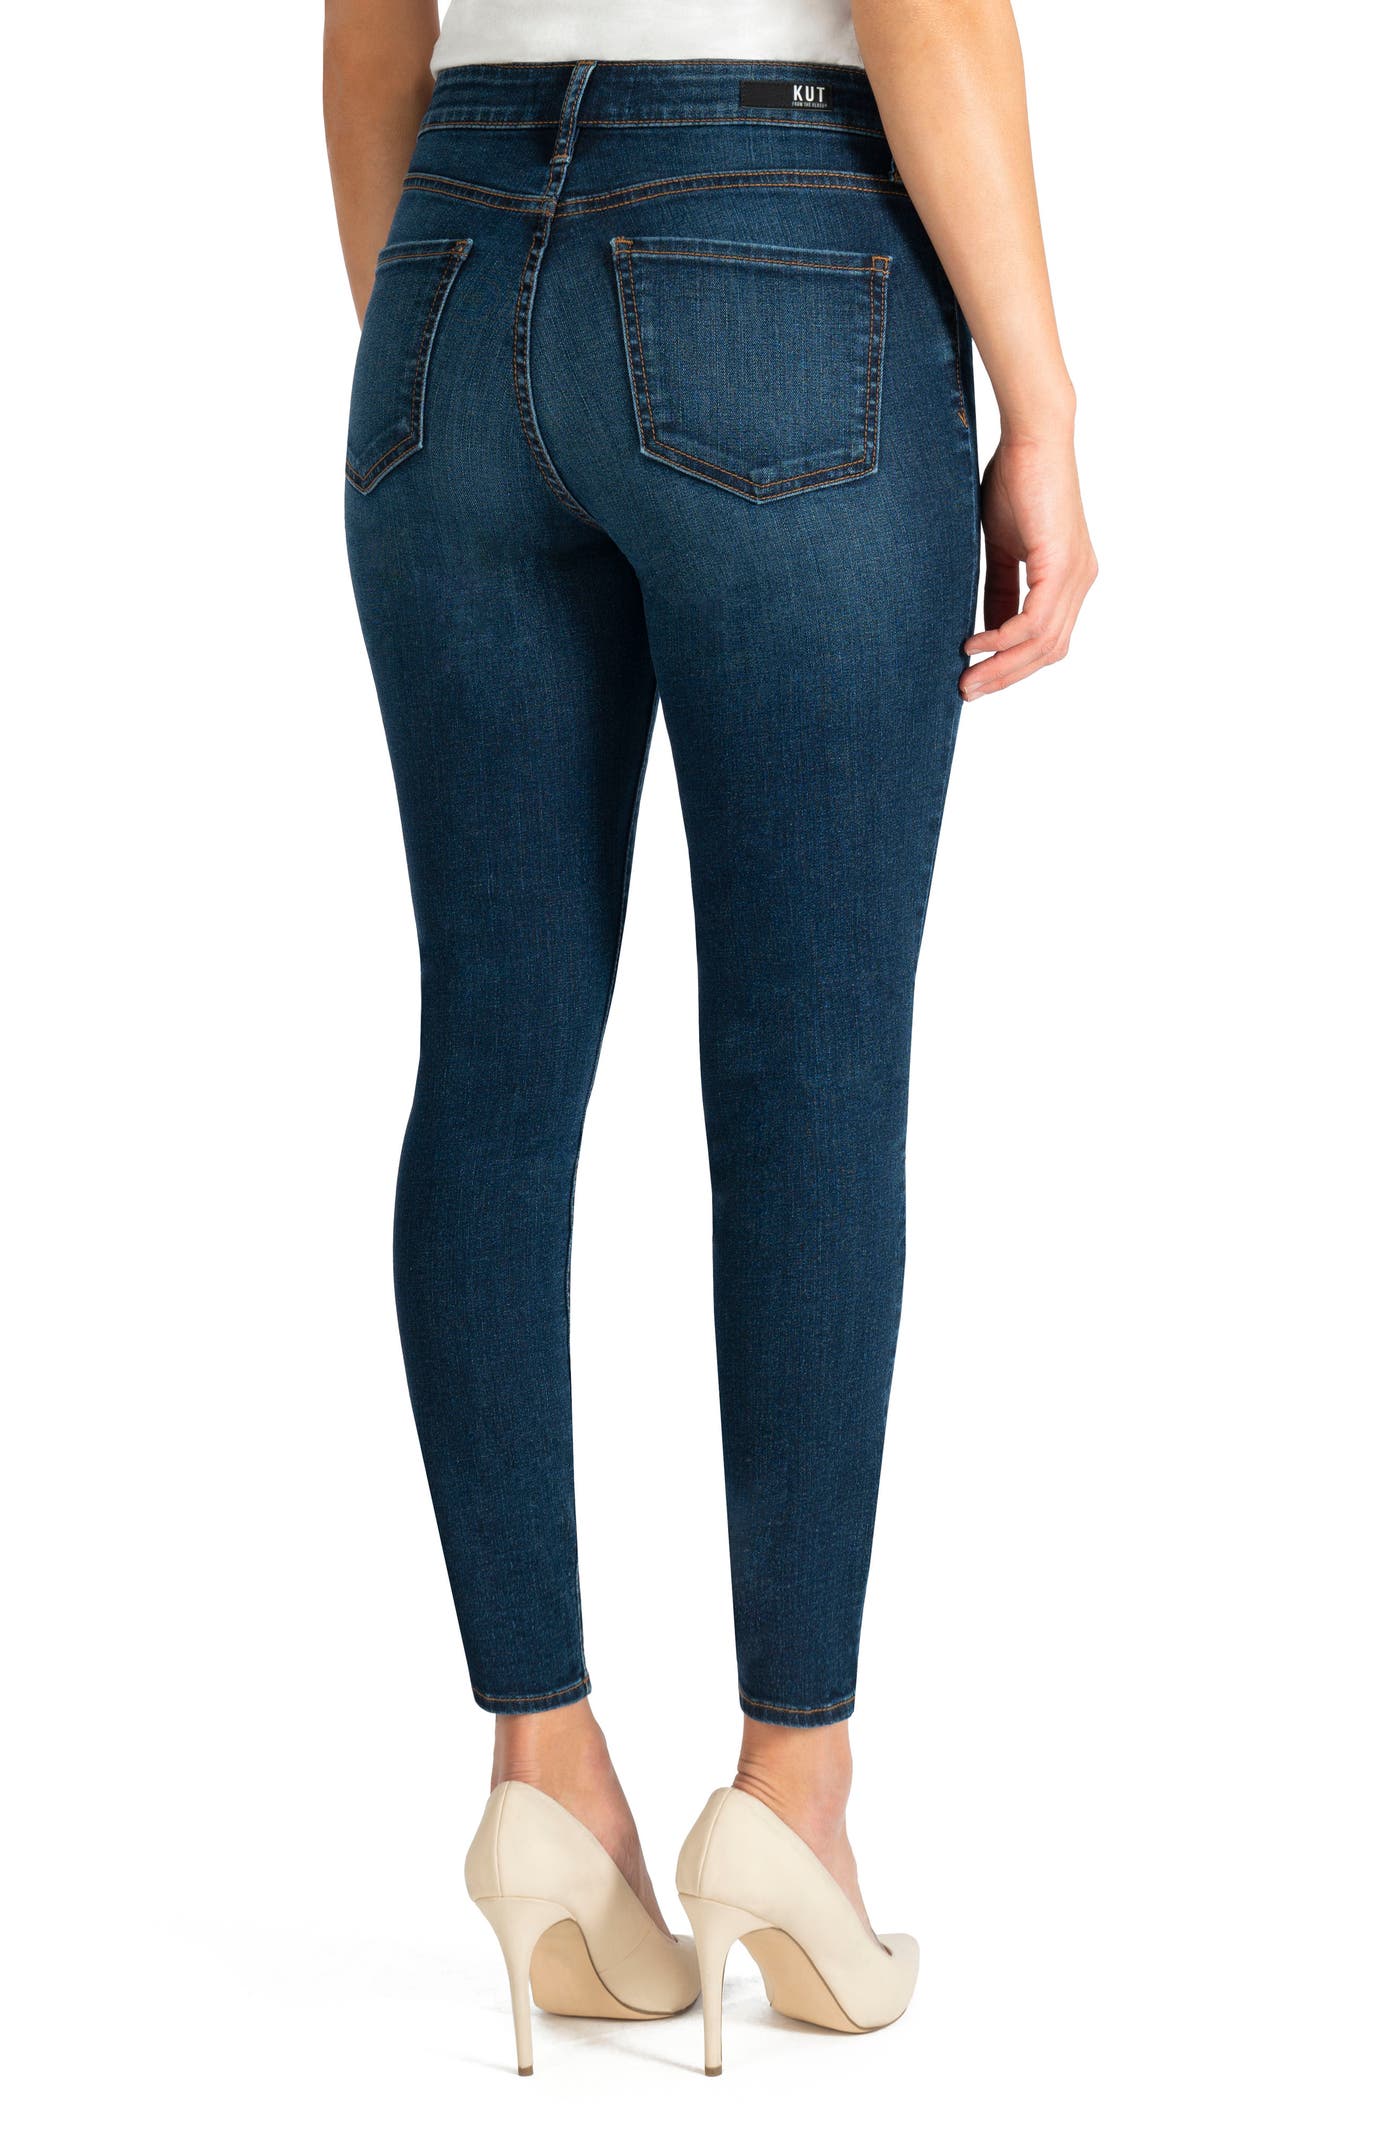 Nordstrom Anniversary Sale: Our Absolute Favorite Jeans | Us Weekly